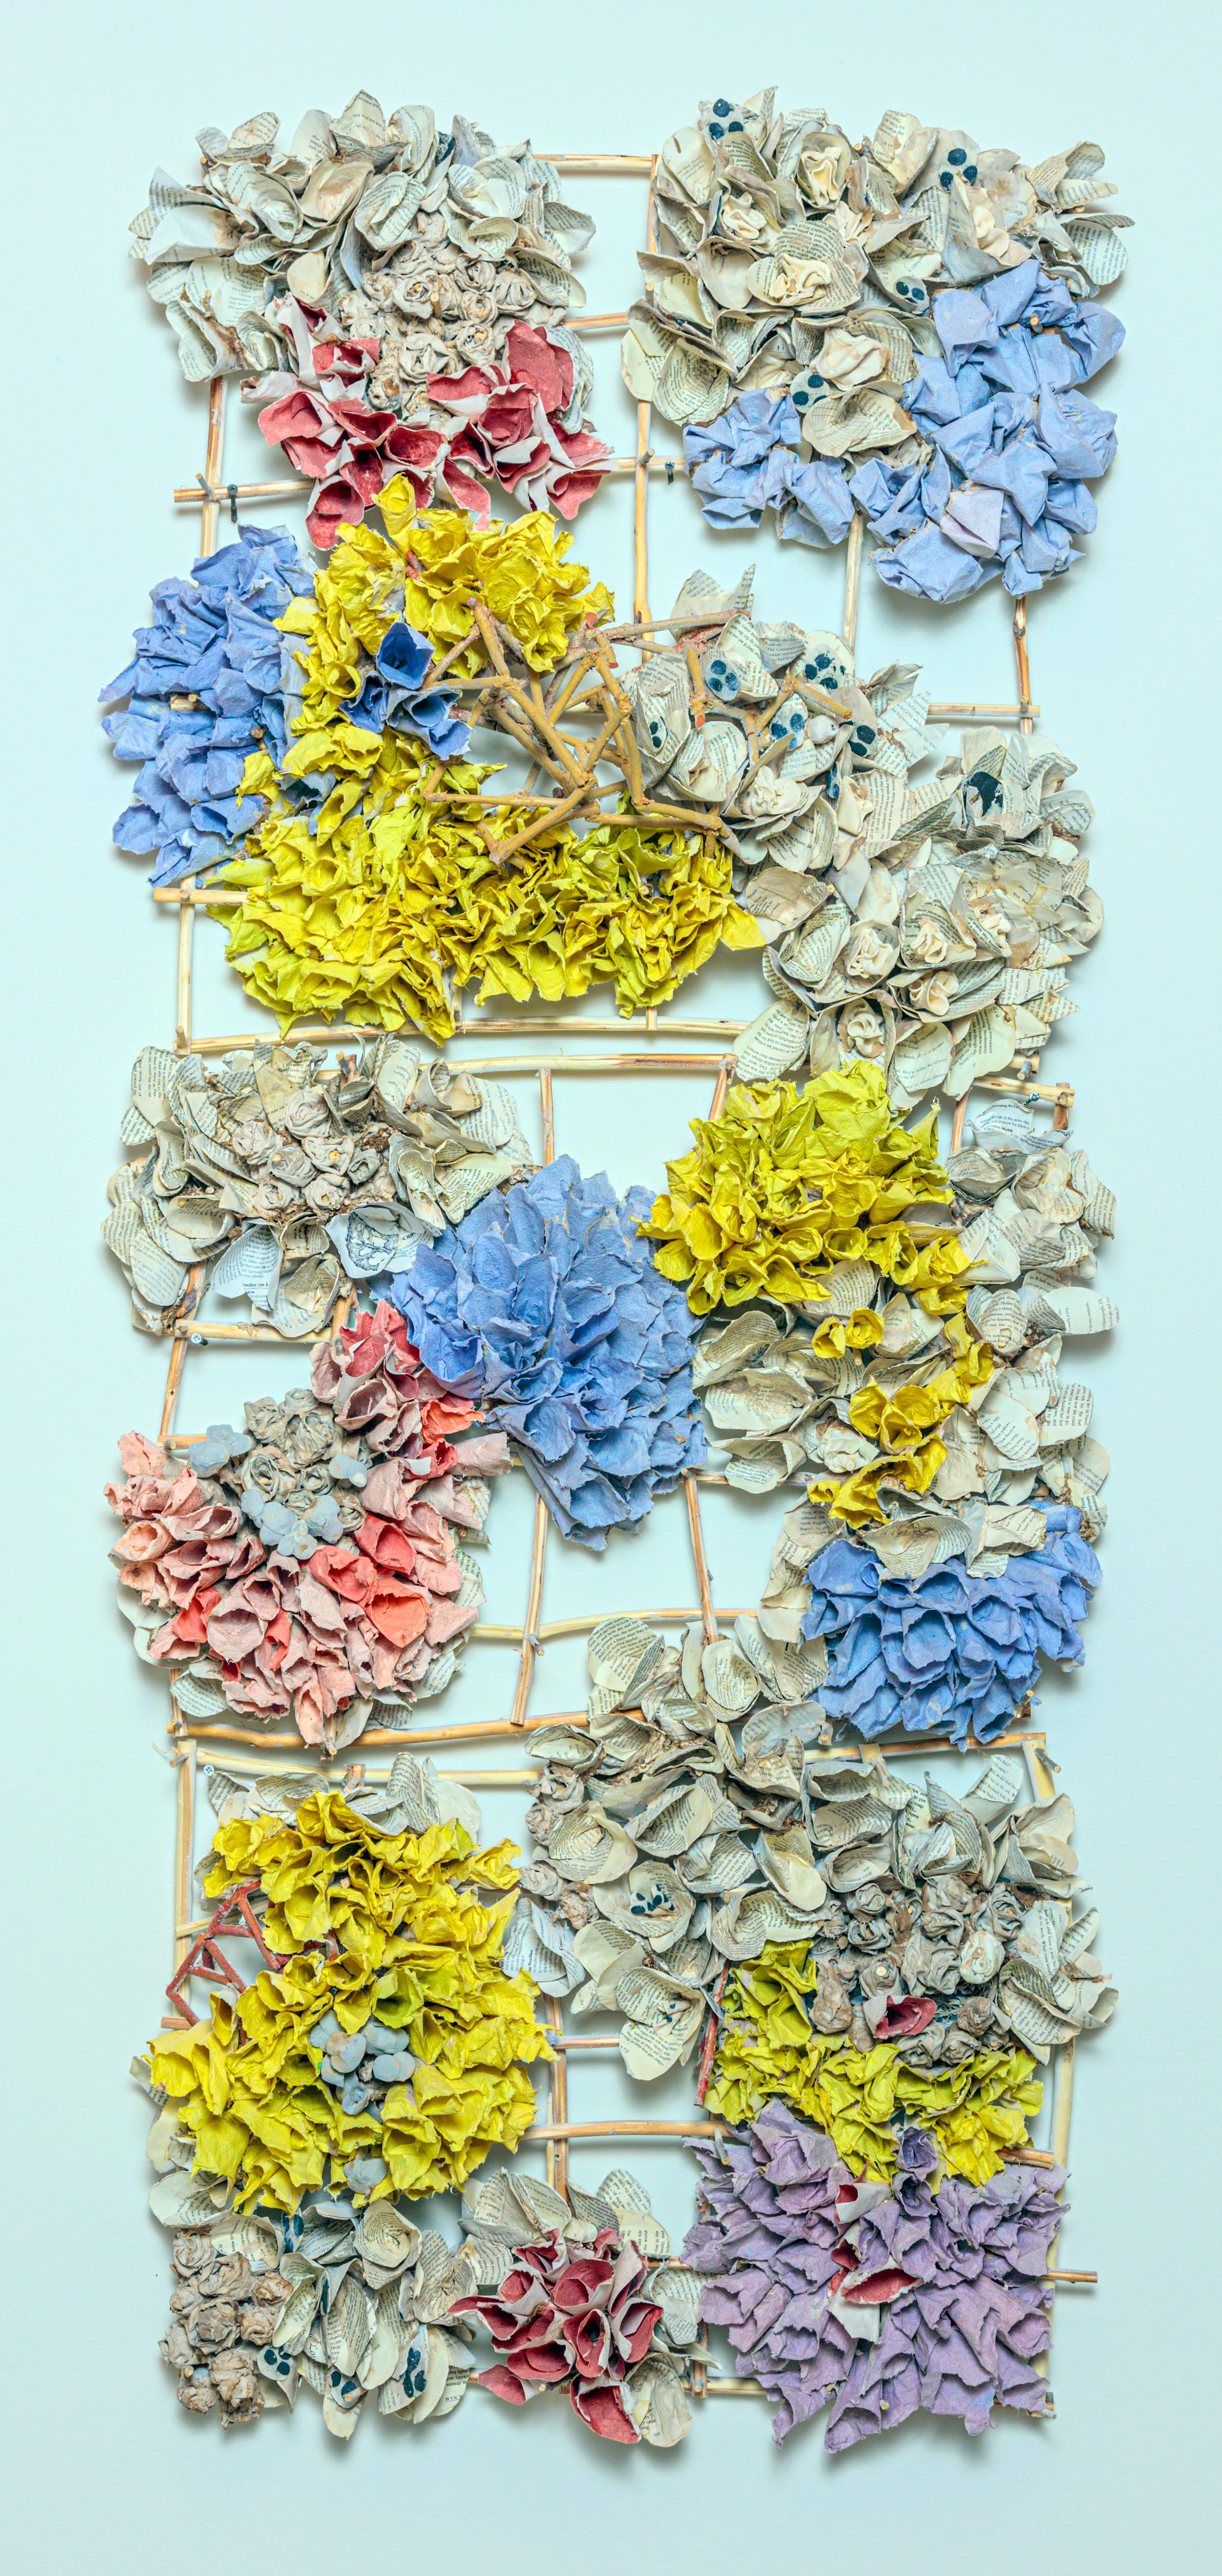 Rebecca Hutchinson Abstract Sculpture - "Yellow Lattice", Contemporary Mixed Media Wall Sculpture with Hand Made Paper